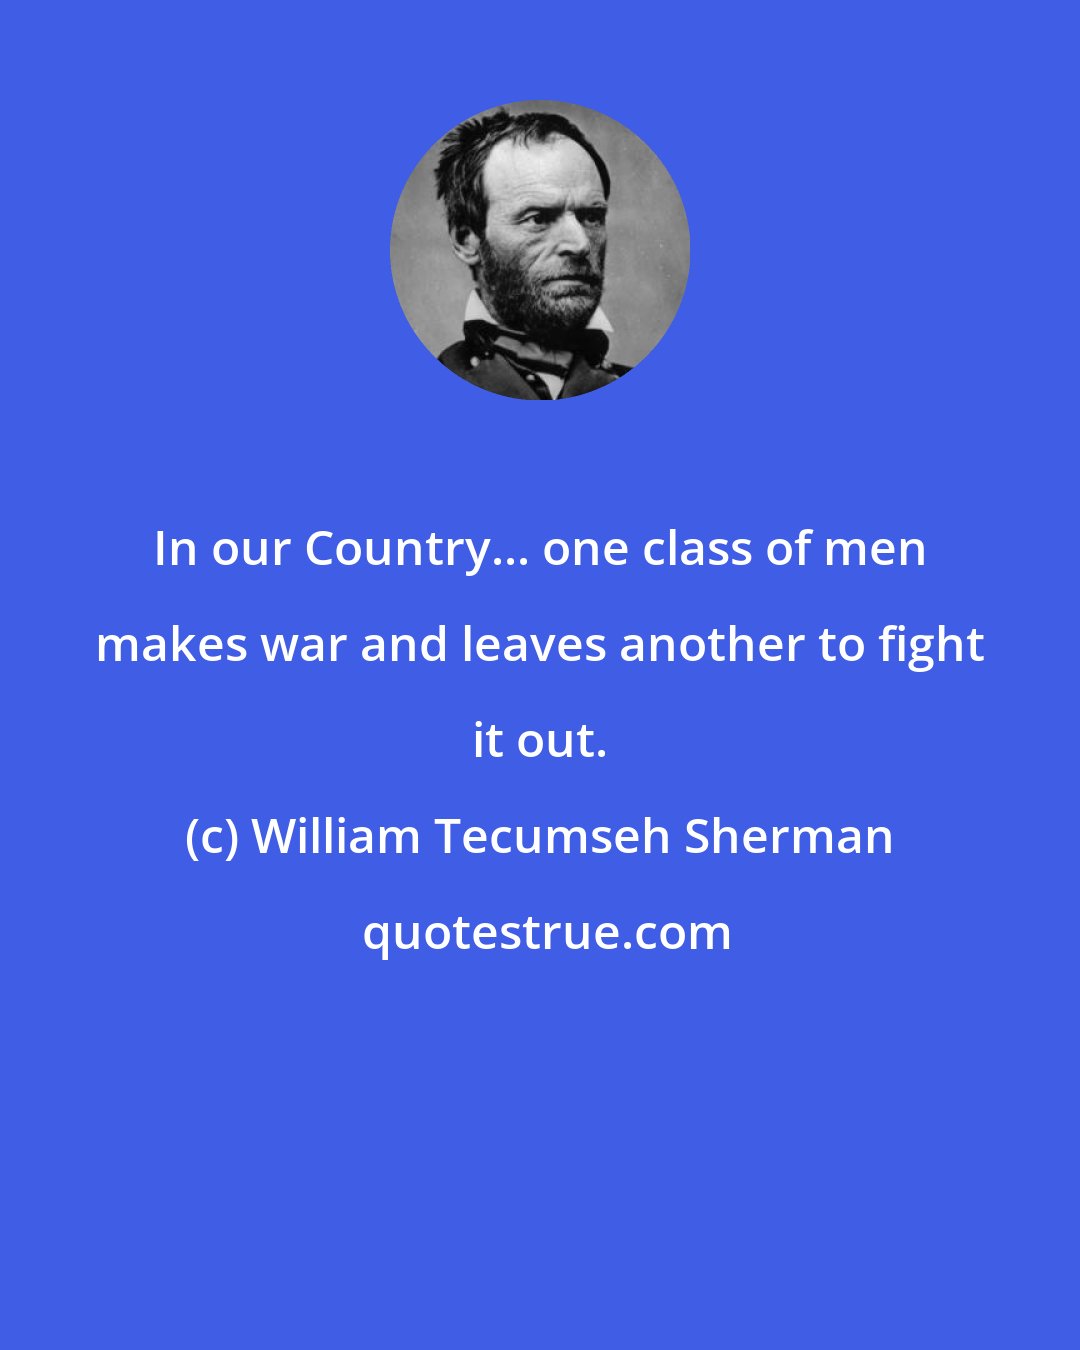 William Tecumseh Sherman: In our Country... one class of men makes war and leaves another to fight it out.